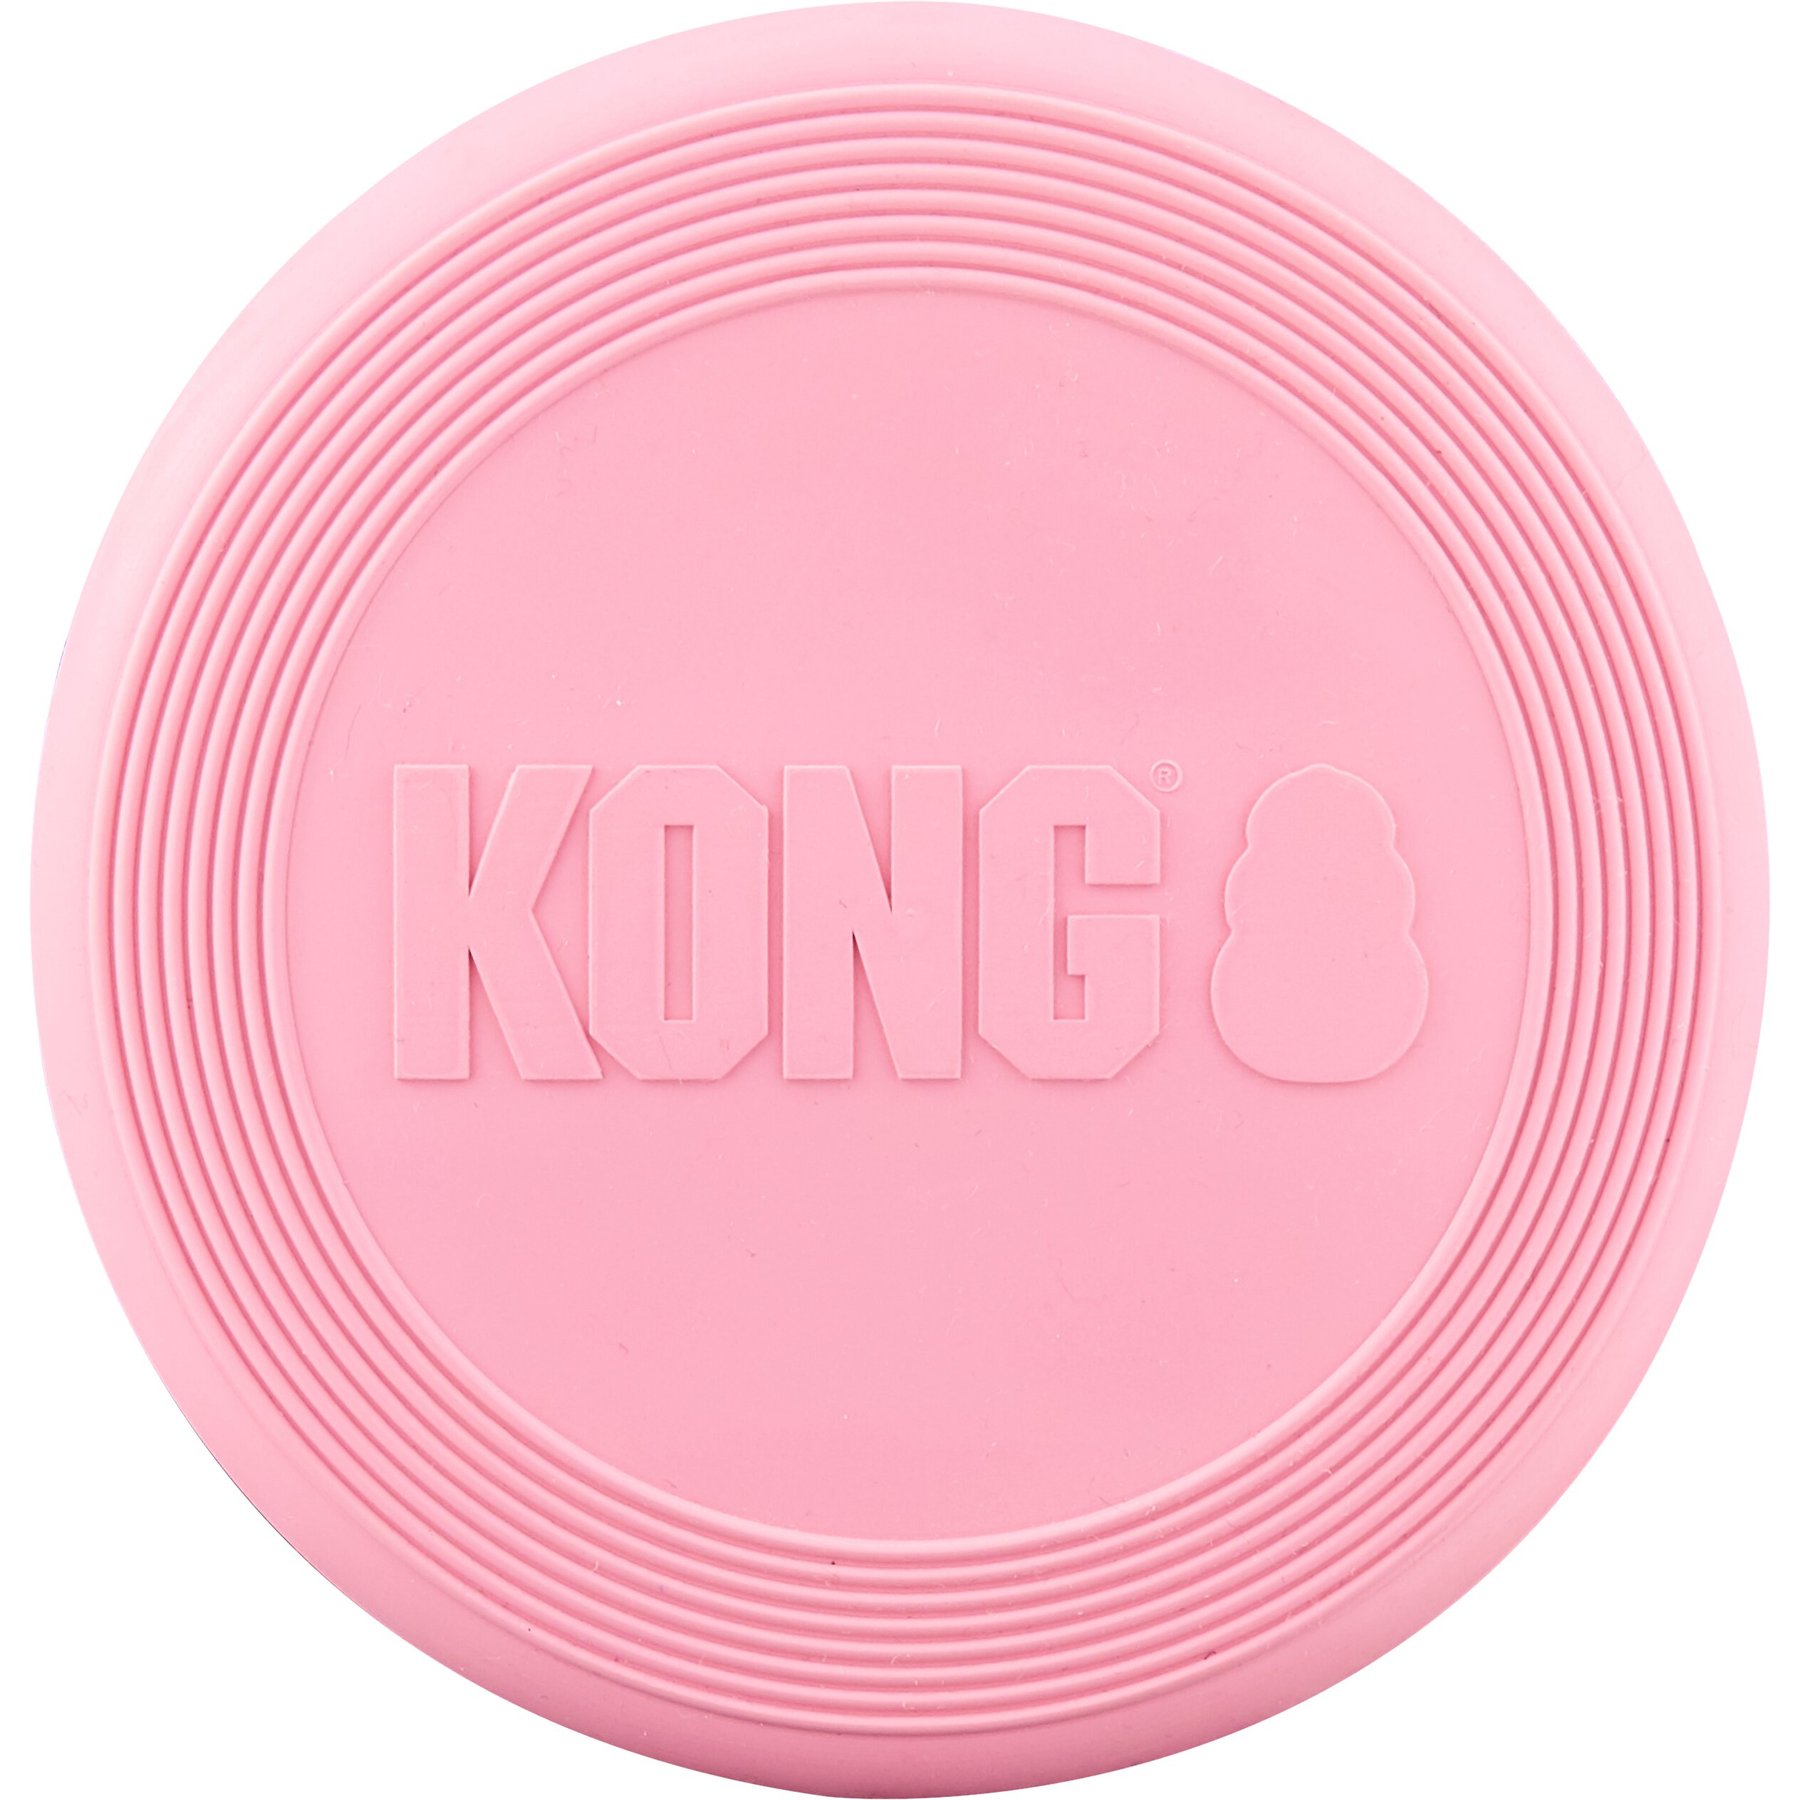 KONG Flyer (Small) [Red] - Pet Wish Pros